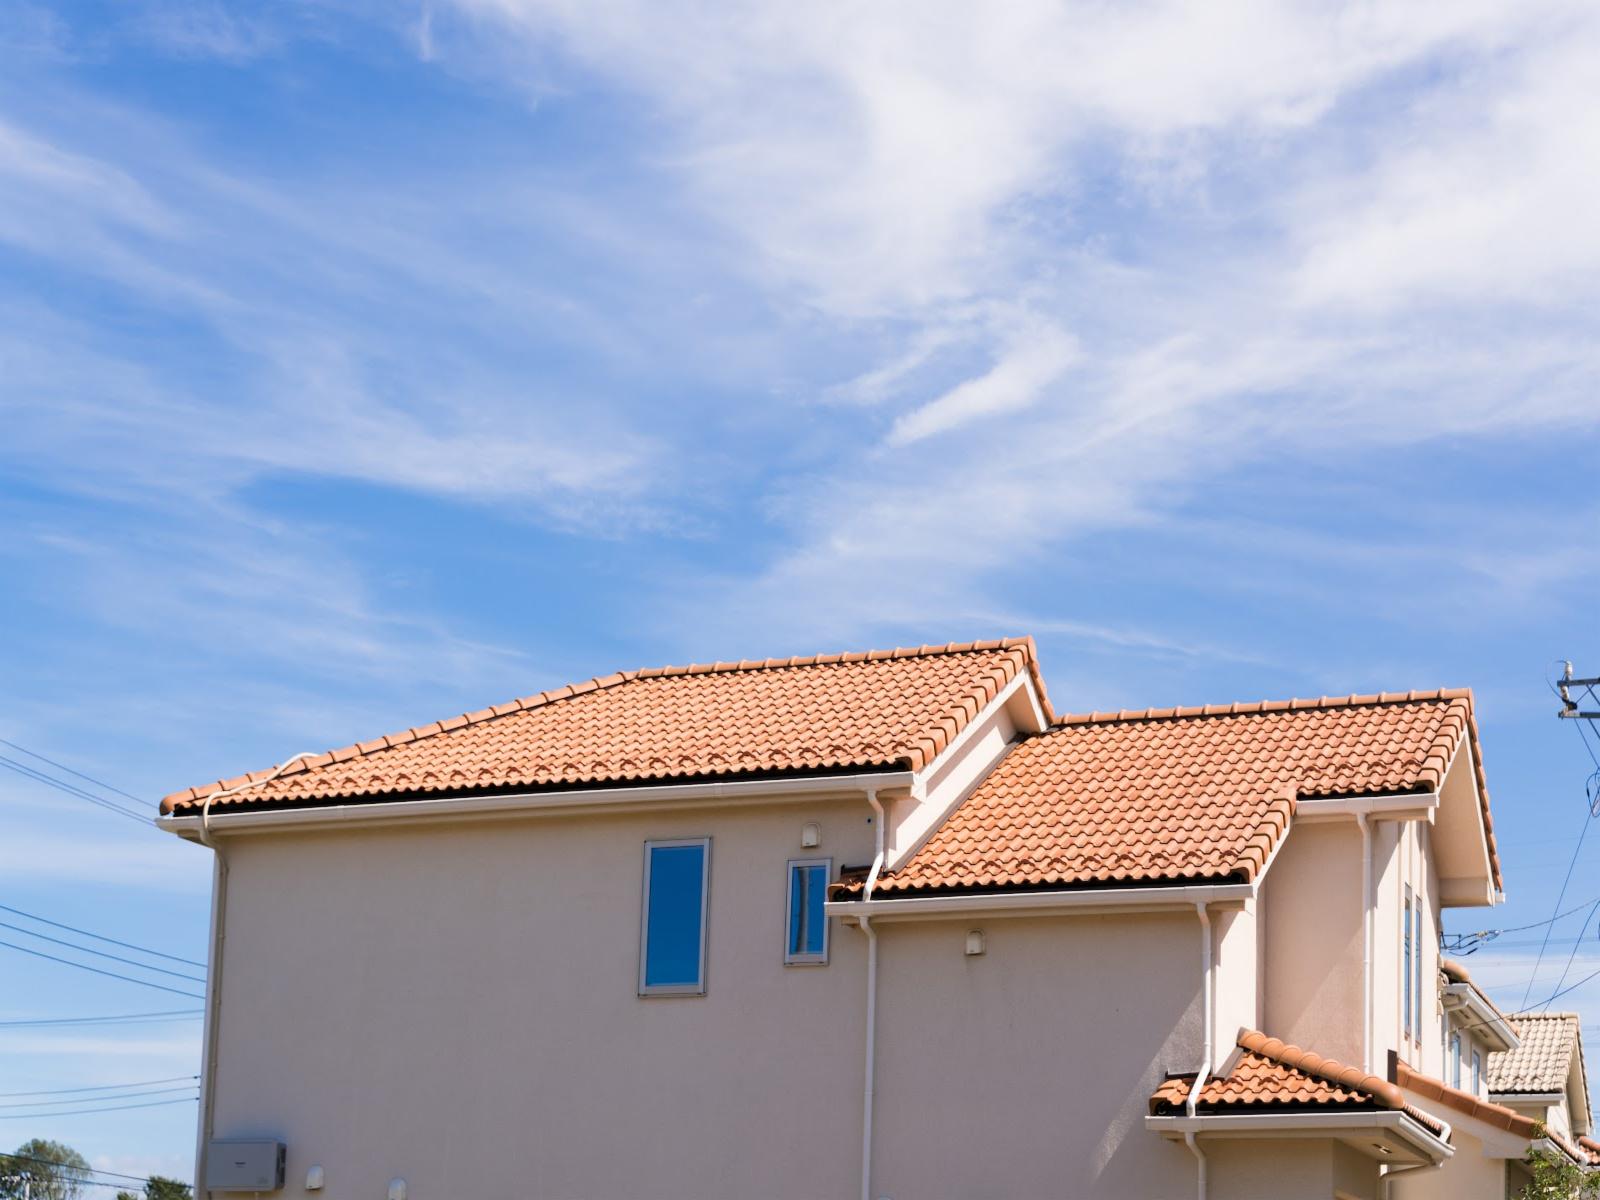 What Is Roof Tile Realignment?